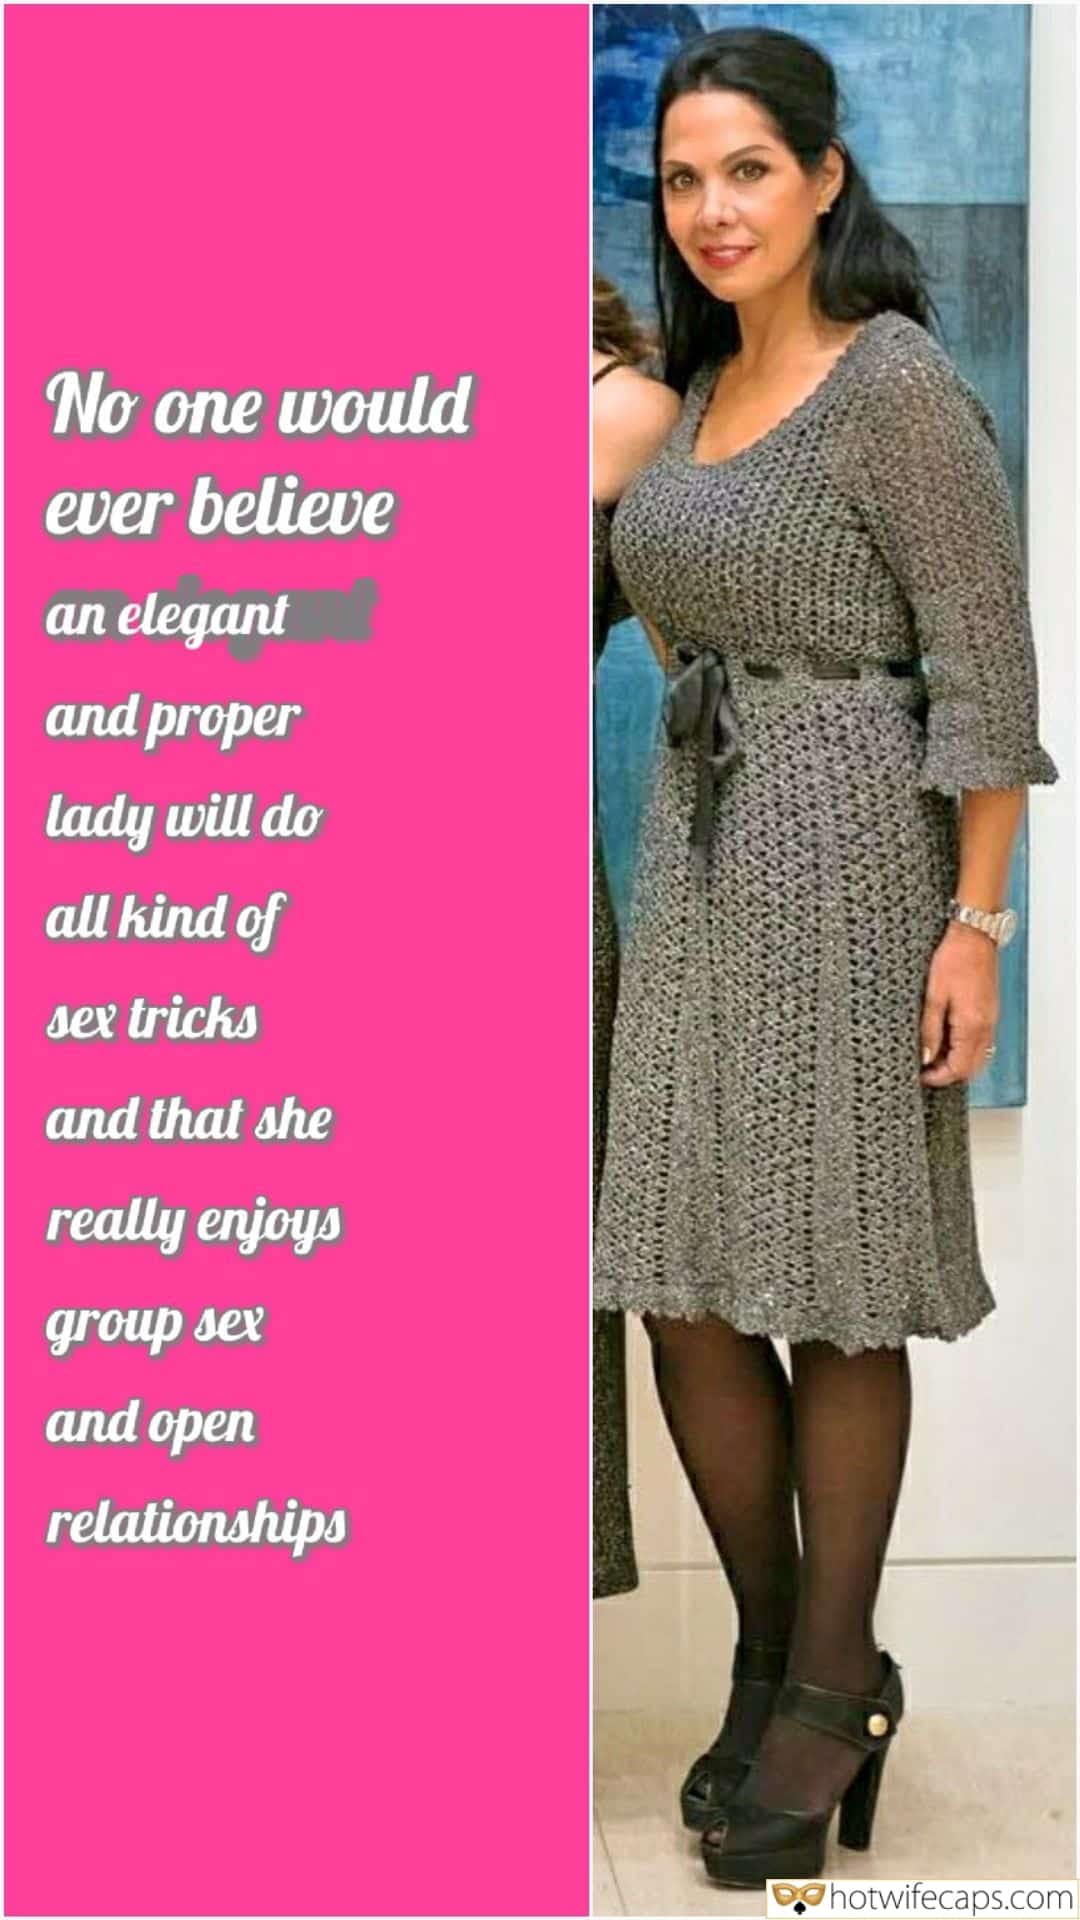 Tips Texts Sexy Memes Group Sex Challenges and Rules hotwife caption: No one would ever believe an elegant and proper lady will do all kind of sex tricks and that she really enjoys group sex and open relationships Little Wife in a Modest Gray Dress